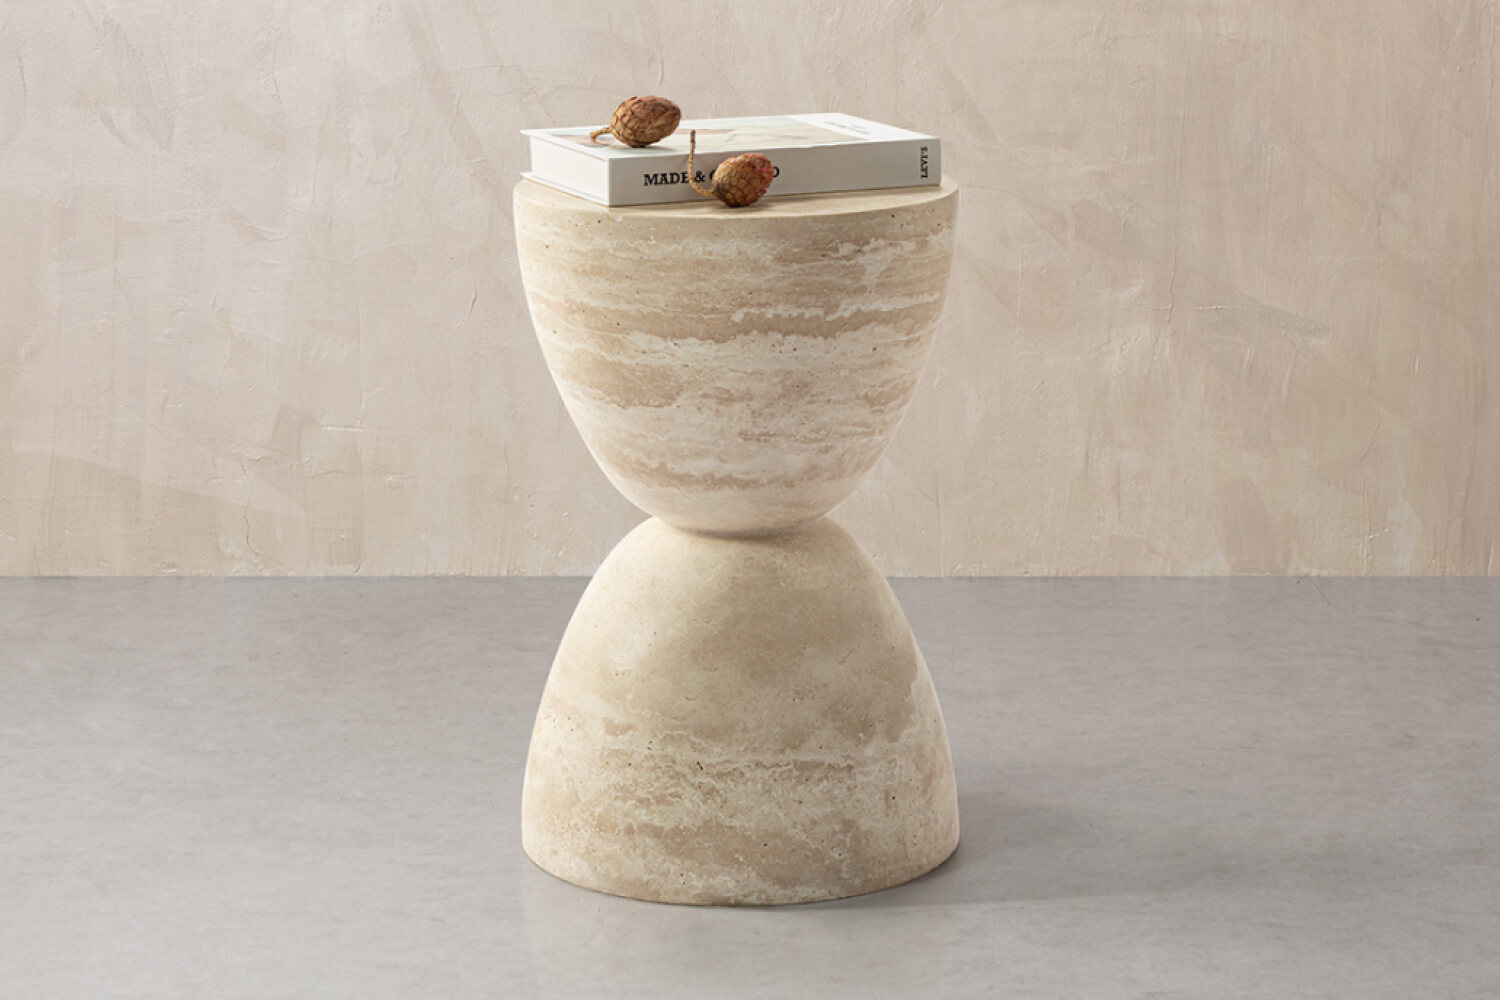 A unique Sera Hourglass White Travertine Side Table table with a textured design resembling an hourglass, topped with a small book and two acorns, against a simple and elegant beige backdrop.